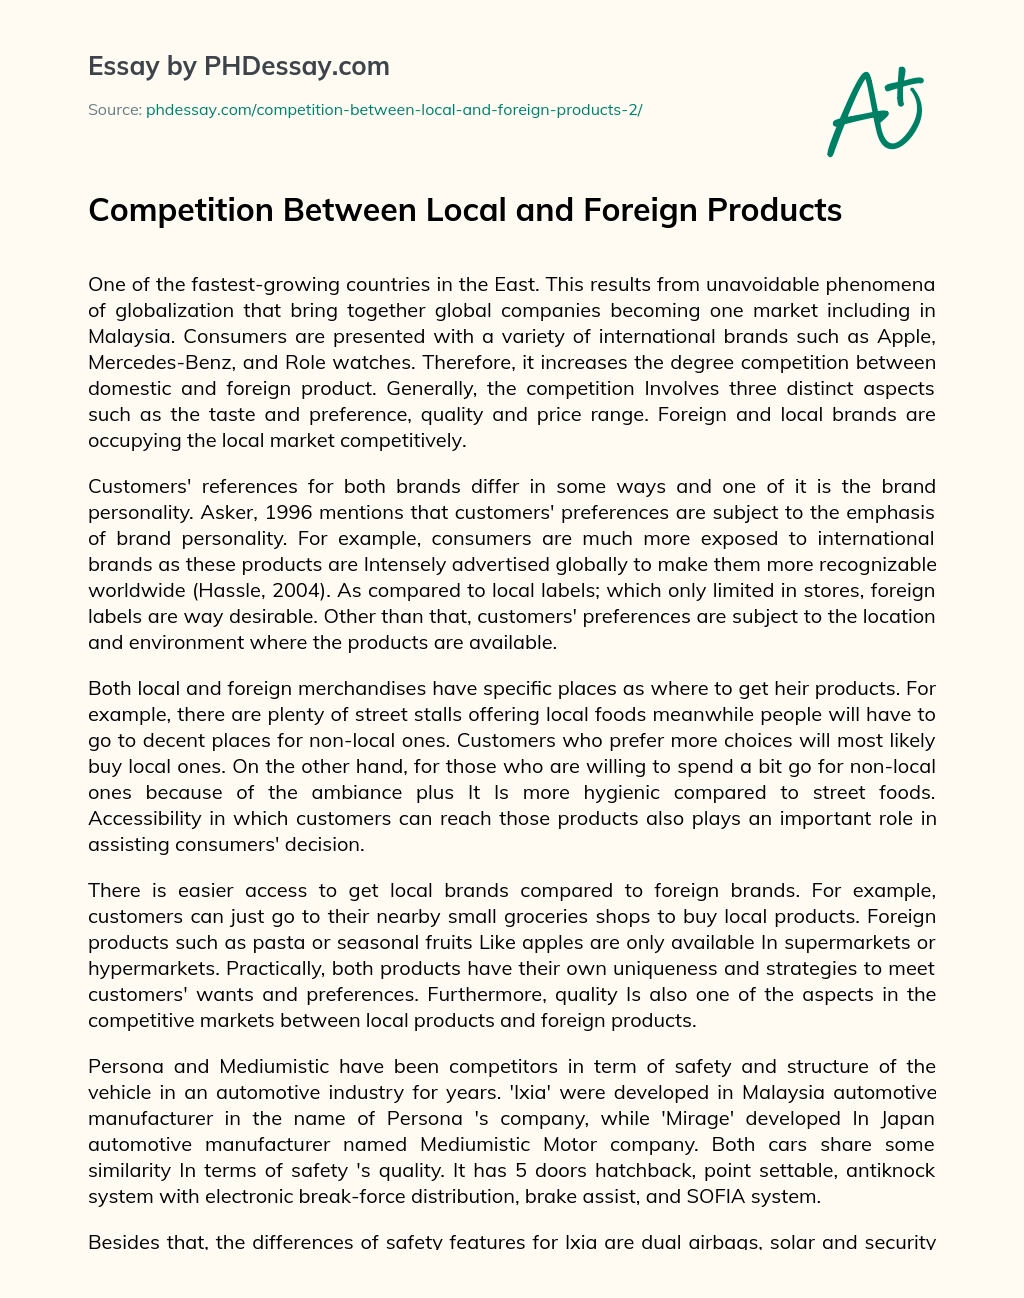 Competition Between Local and Foreign Products essay